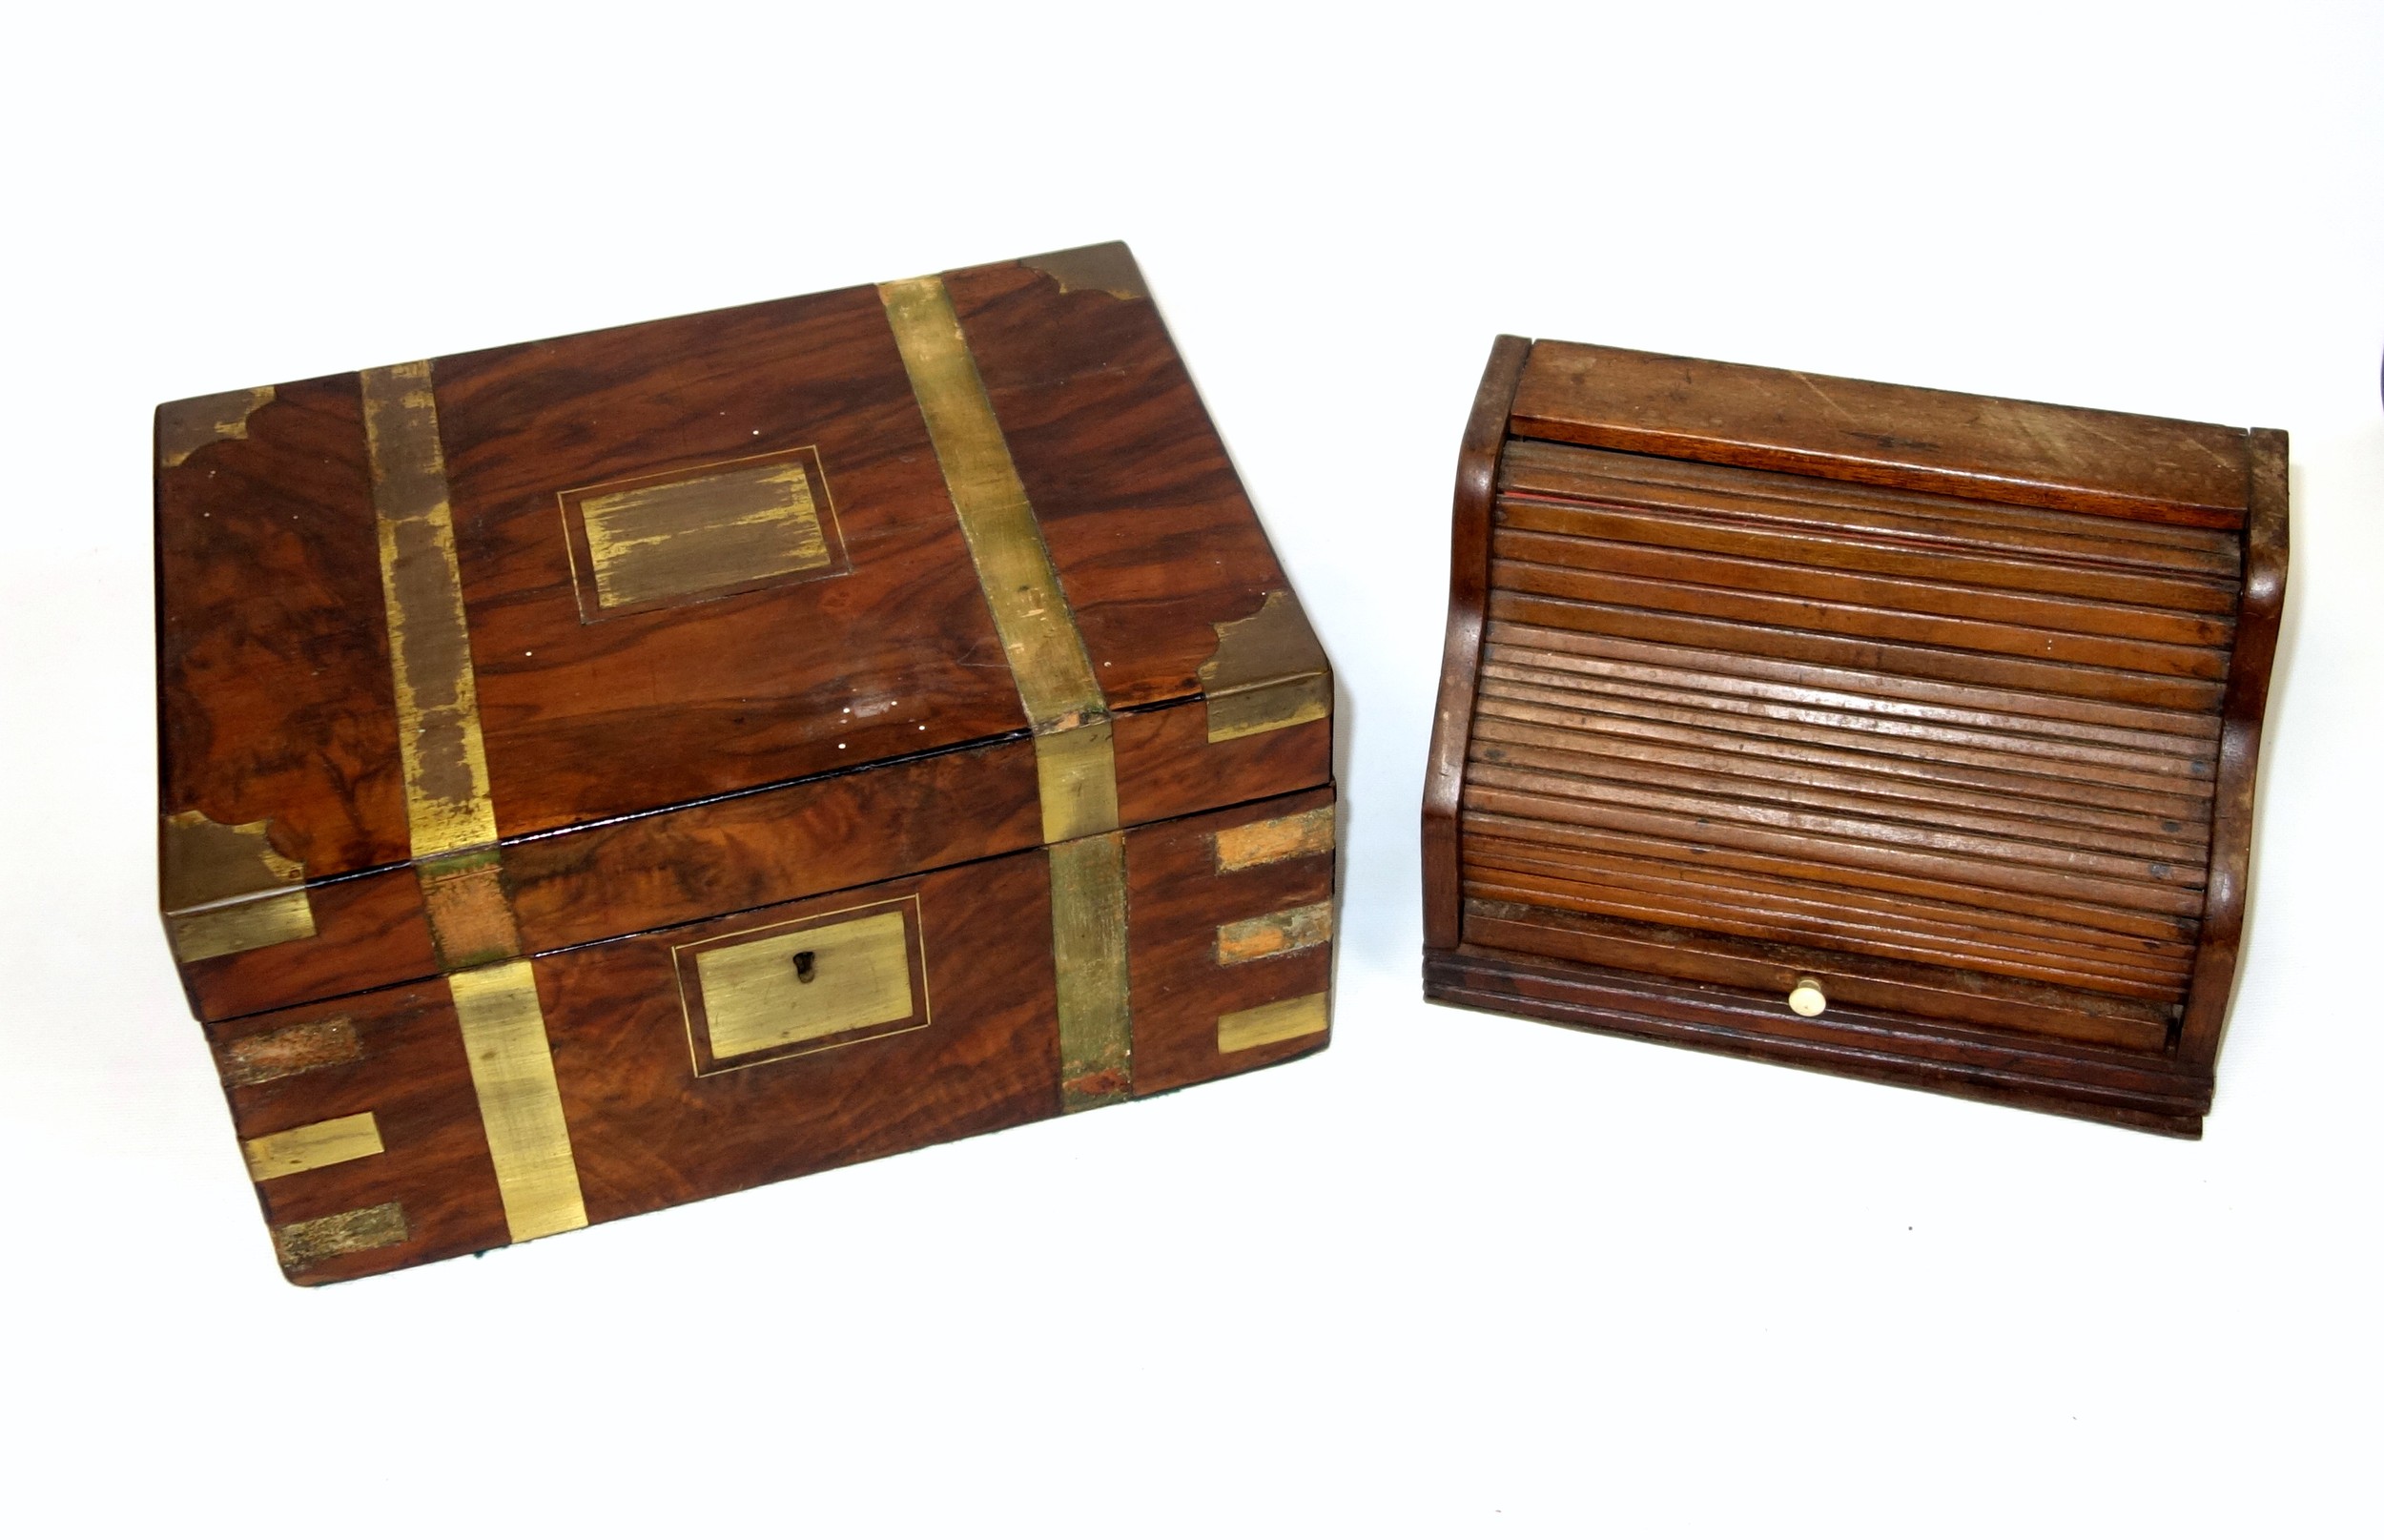 Victorian brass inlaid rosewood portable writing desk with 2 brass covered wells and secret panel - Image 10 of 14